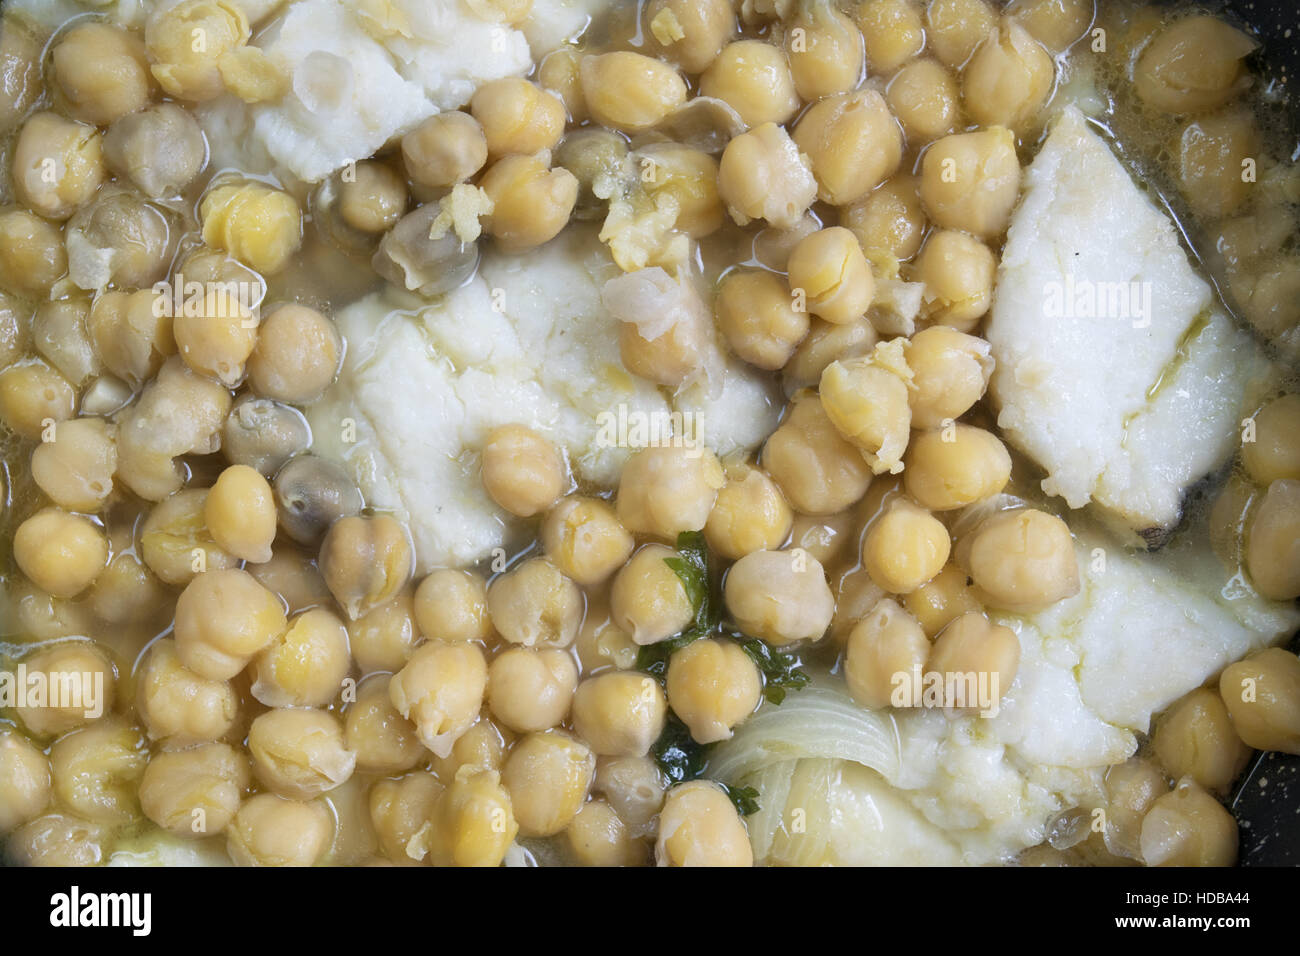 soup of salted cod fish with chickpeas Stock Photo